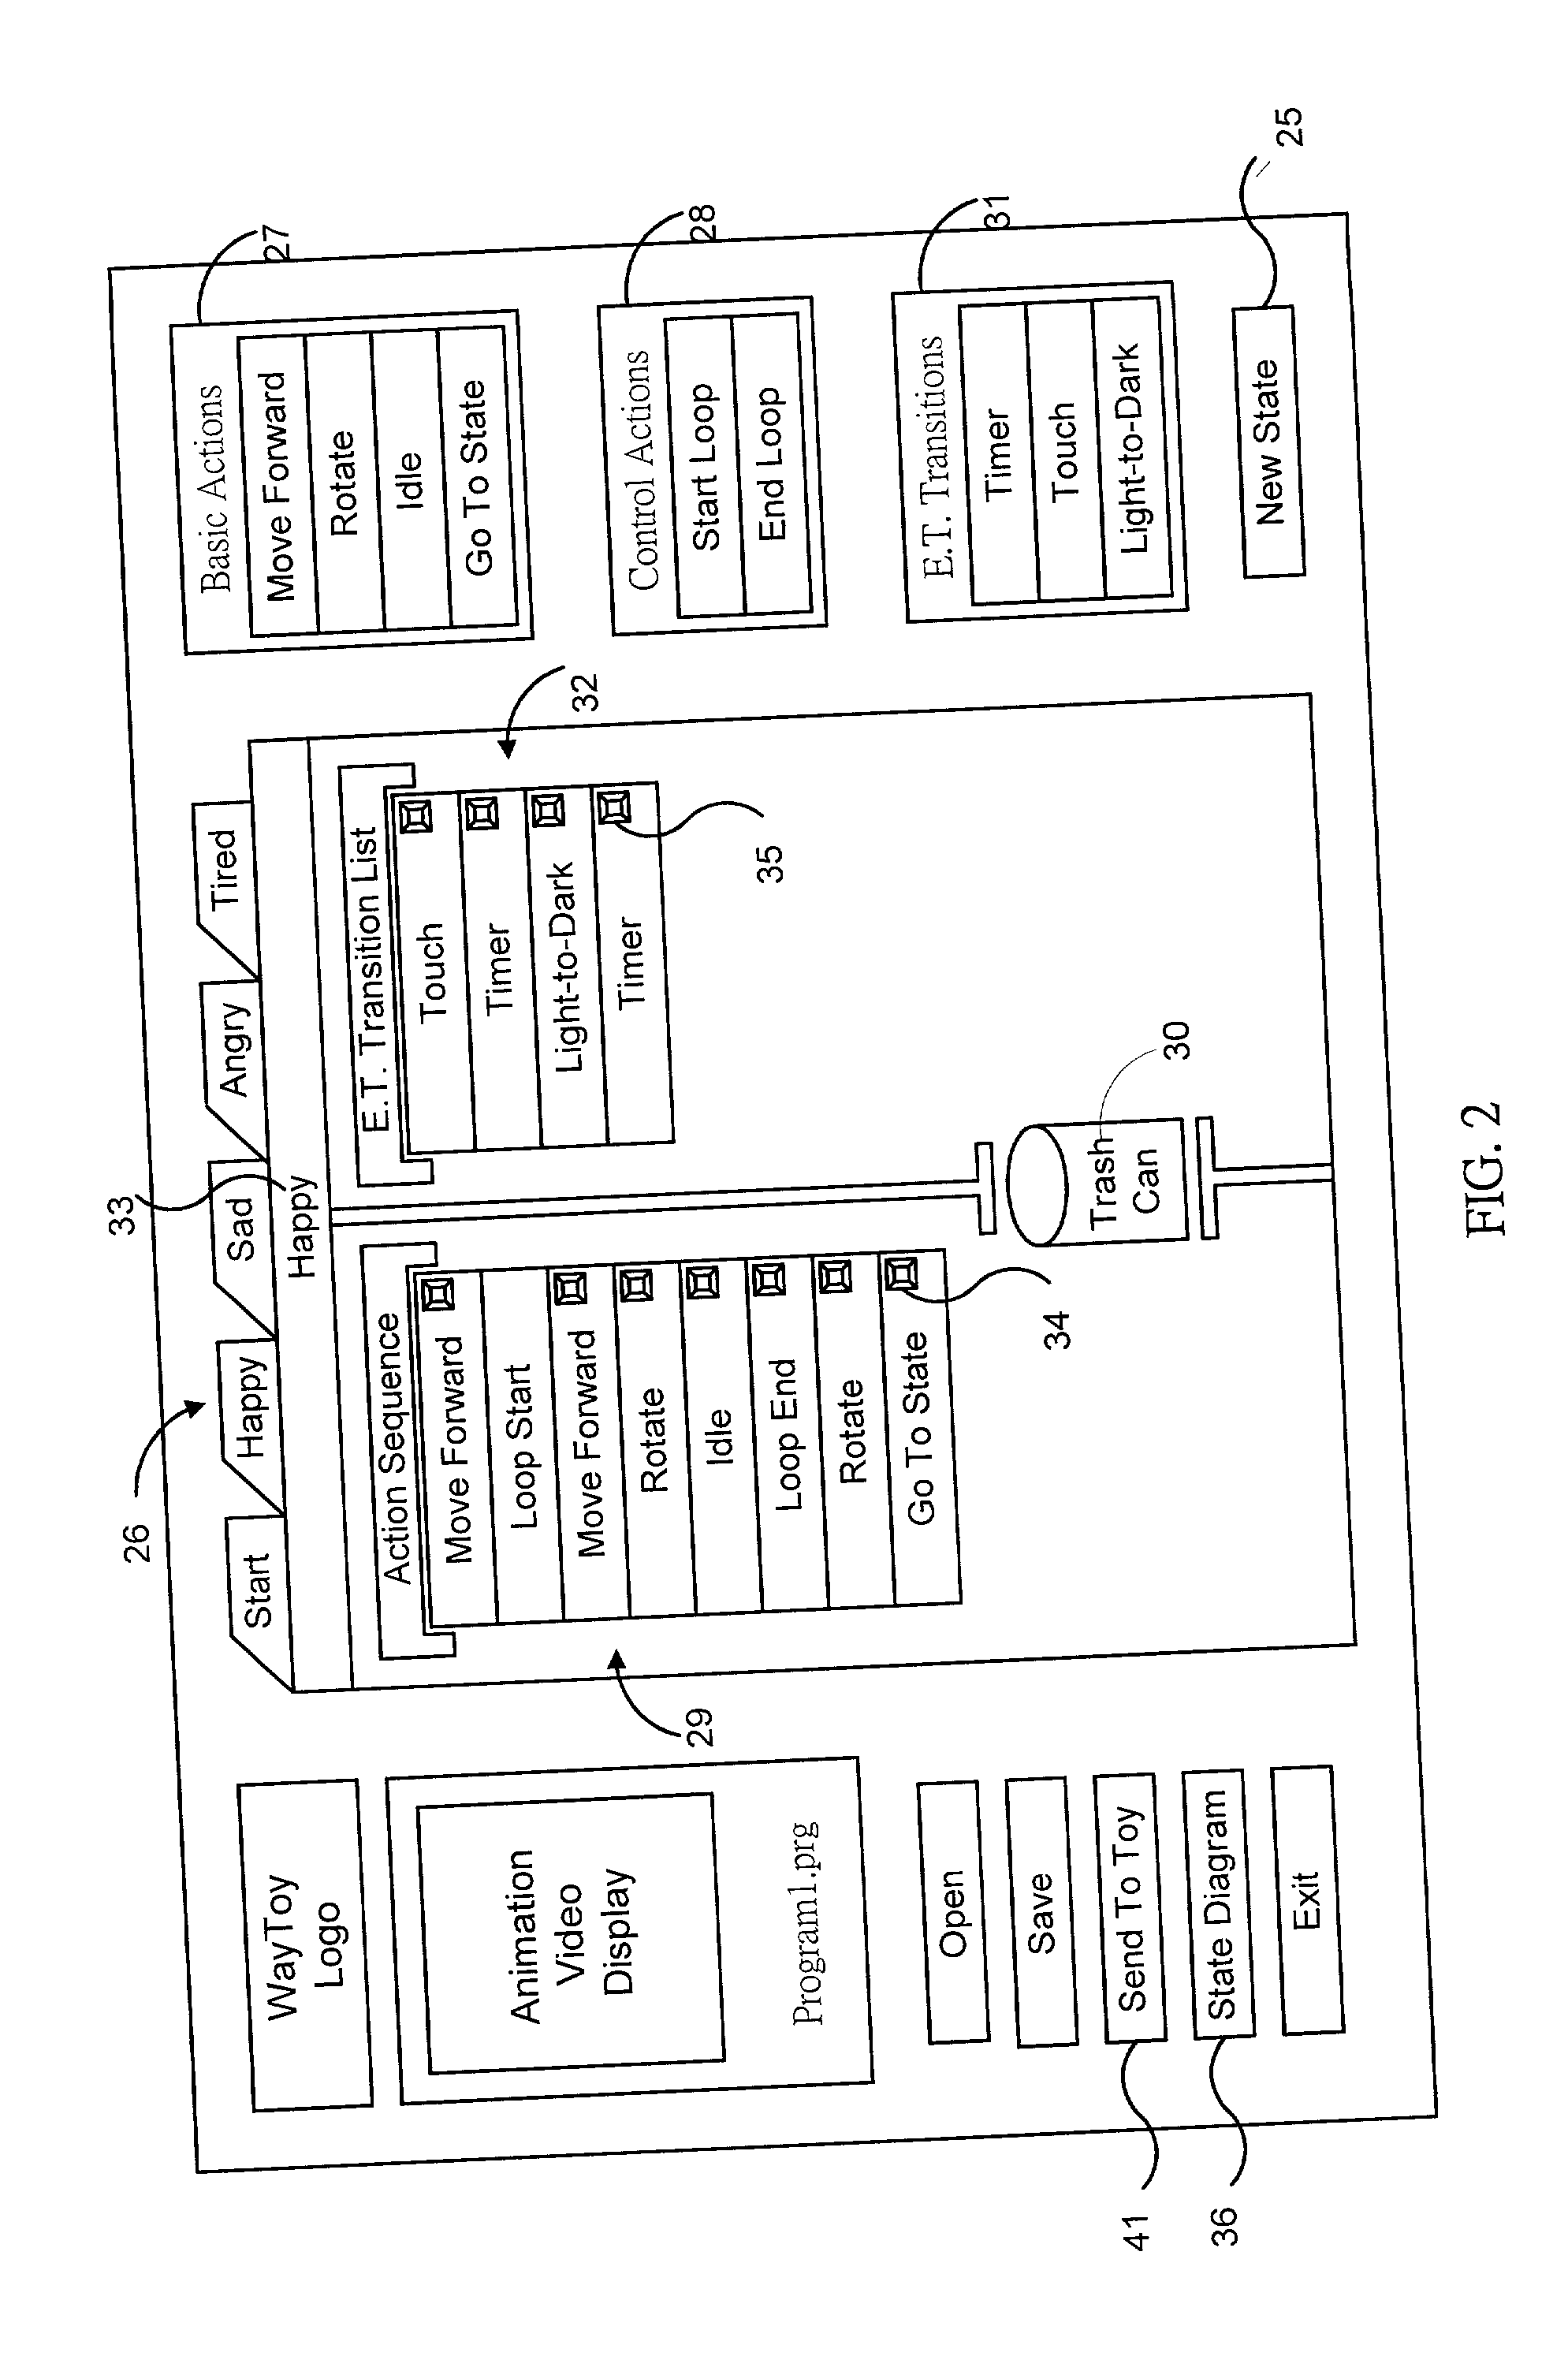 Method and system for programming devices using finite state machine descriptions